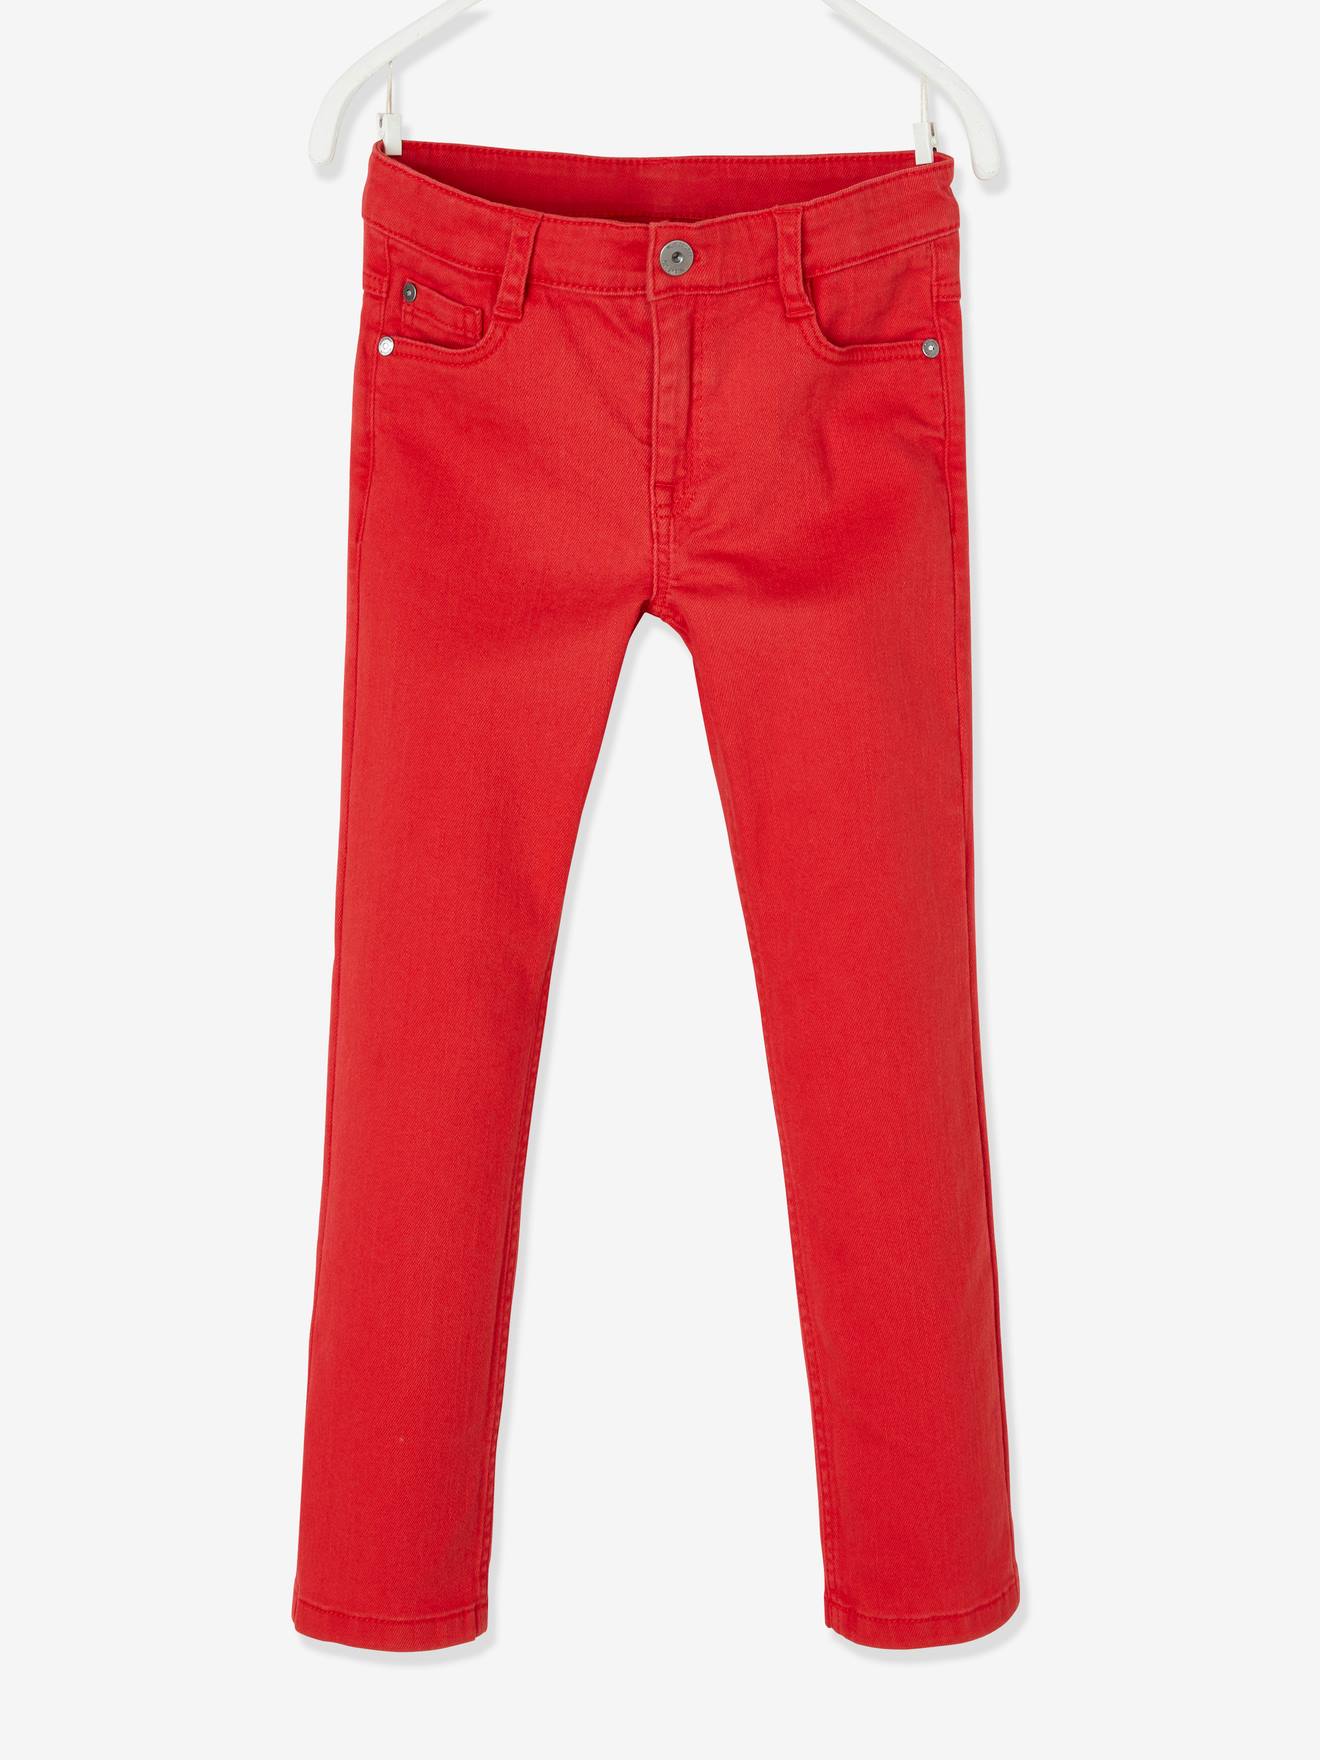 red colour jeans